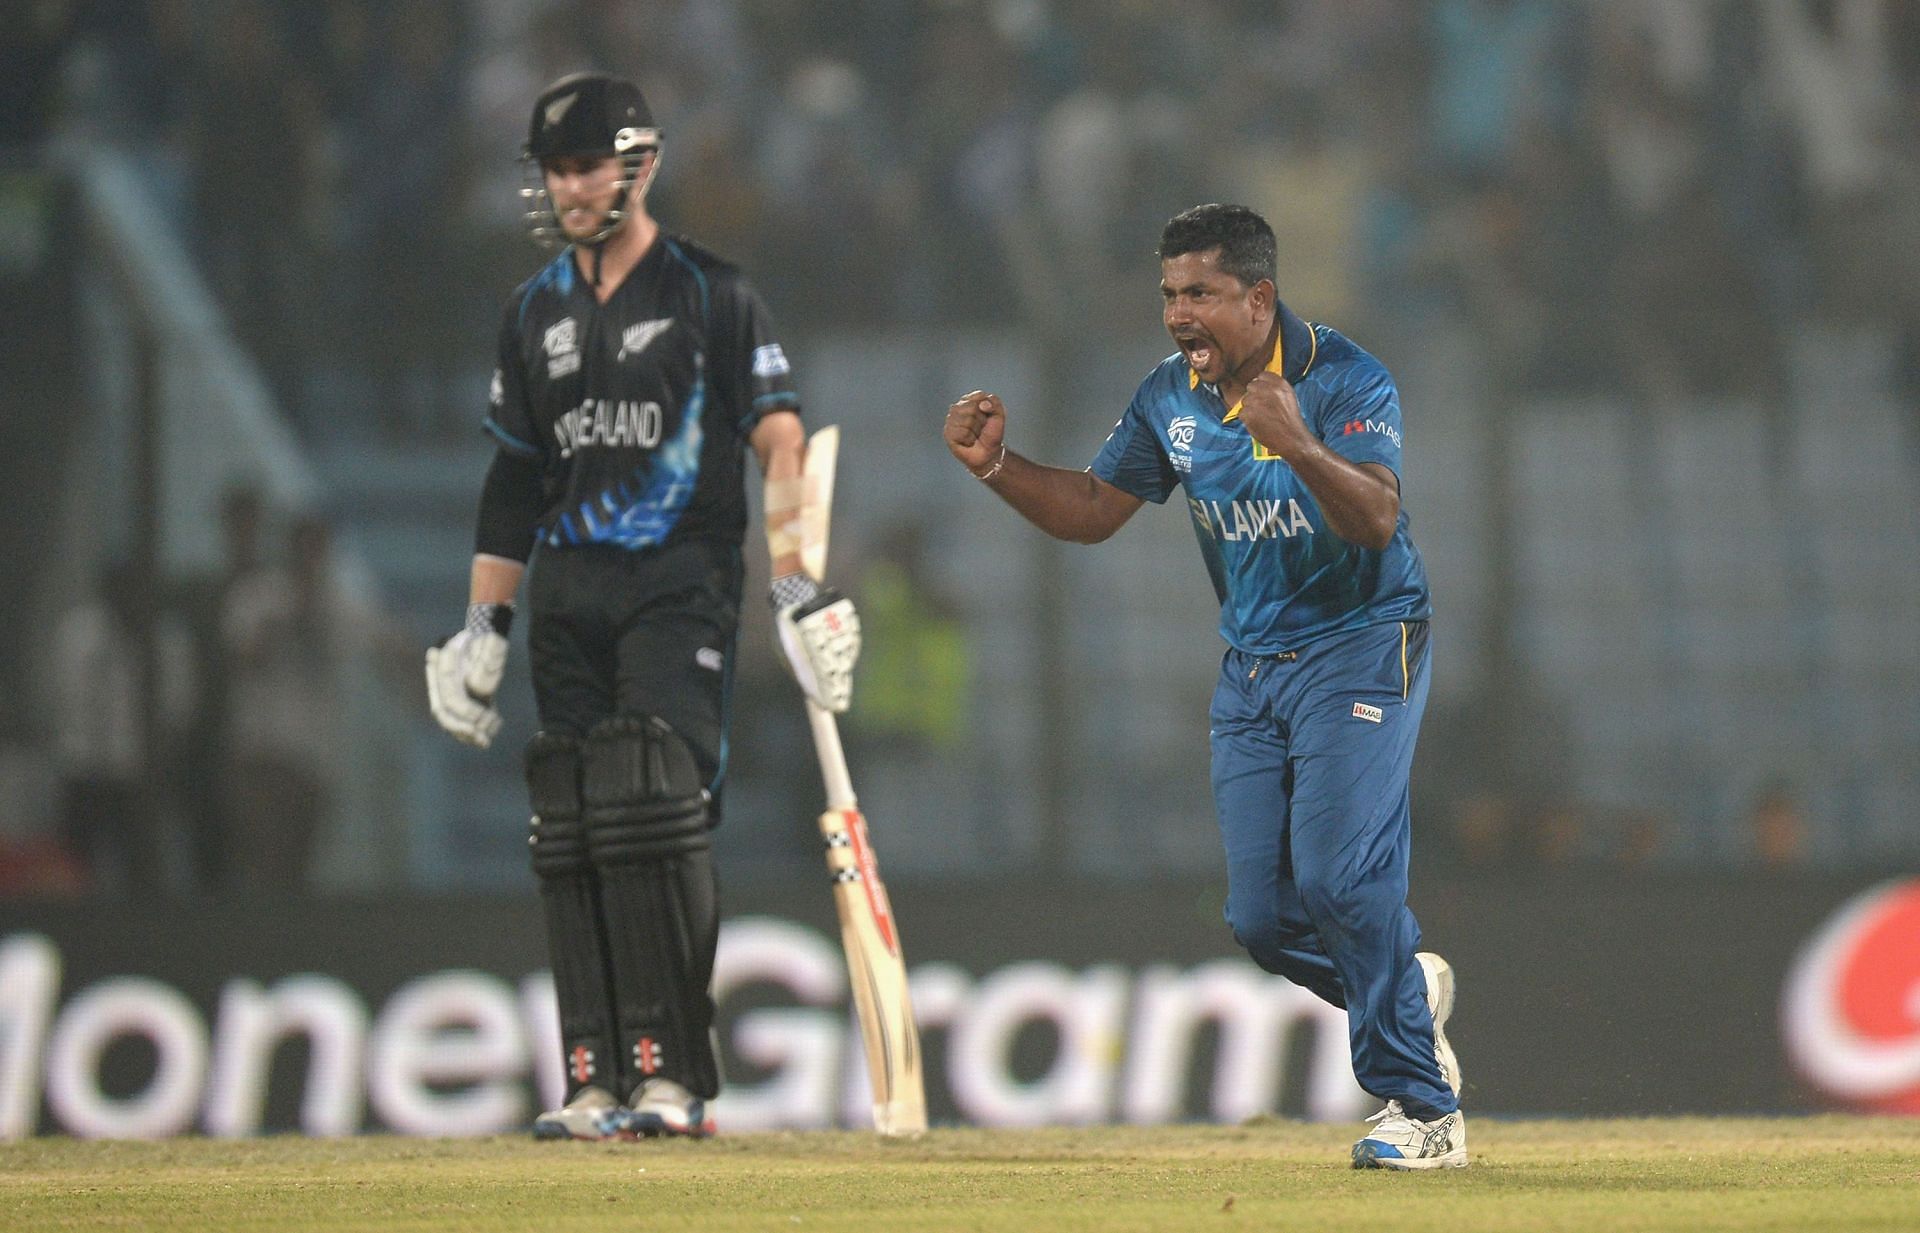 Rangana Herath was on fire against New Zealand that night